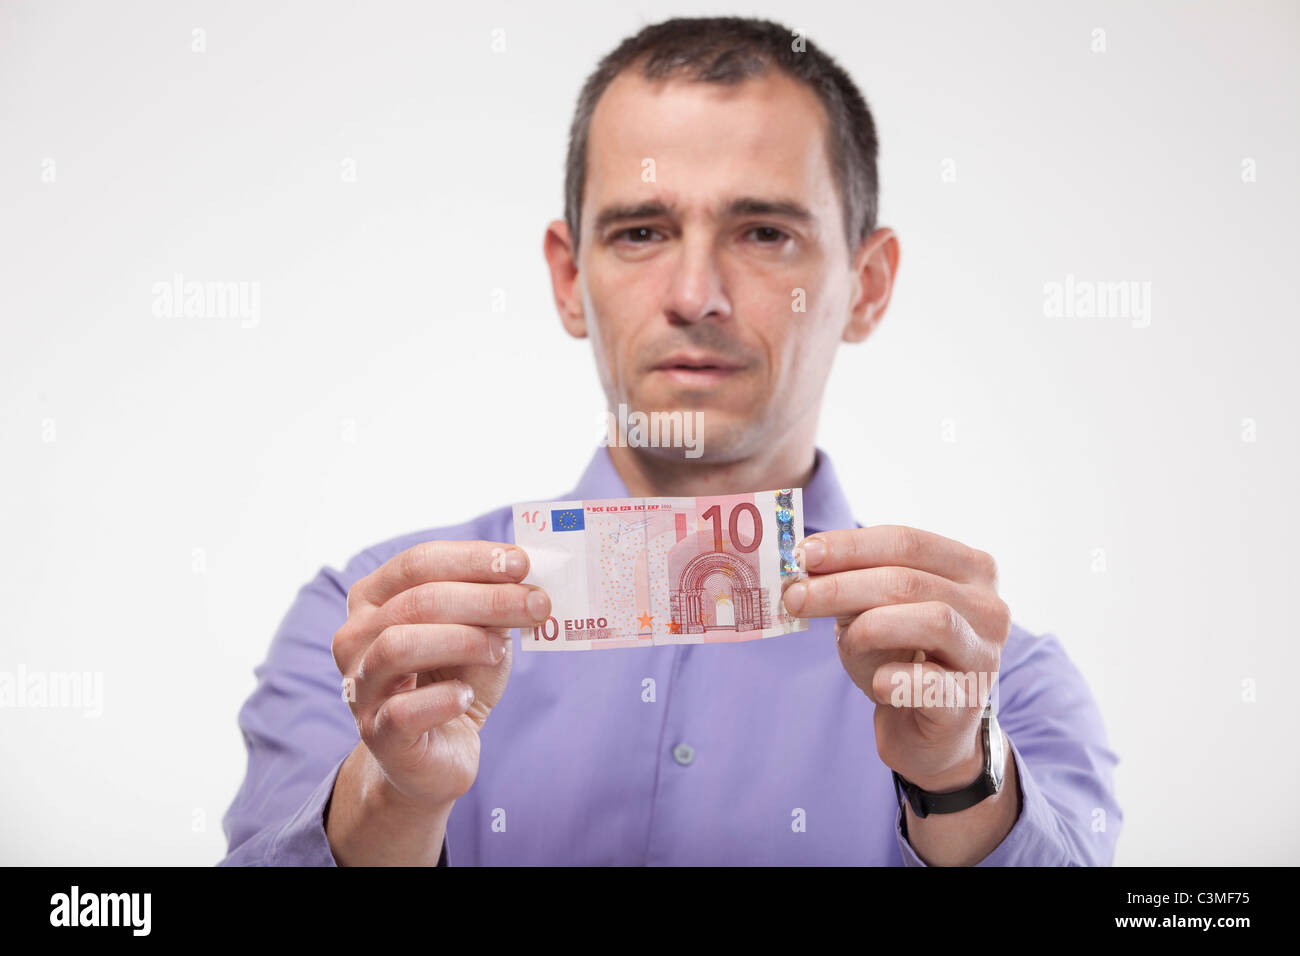 Mature man holding euro note Banque D'Images